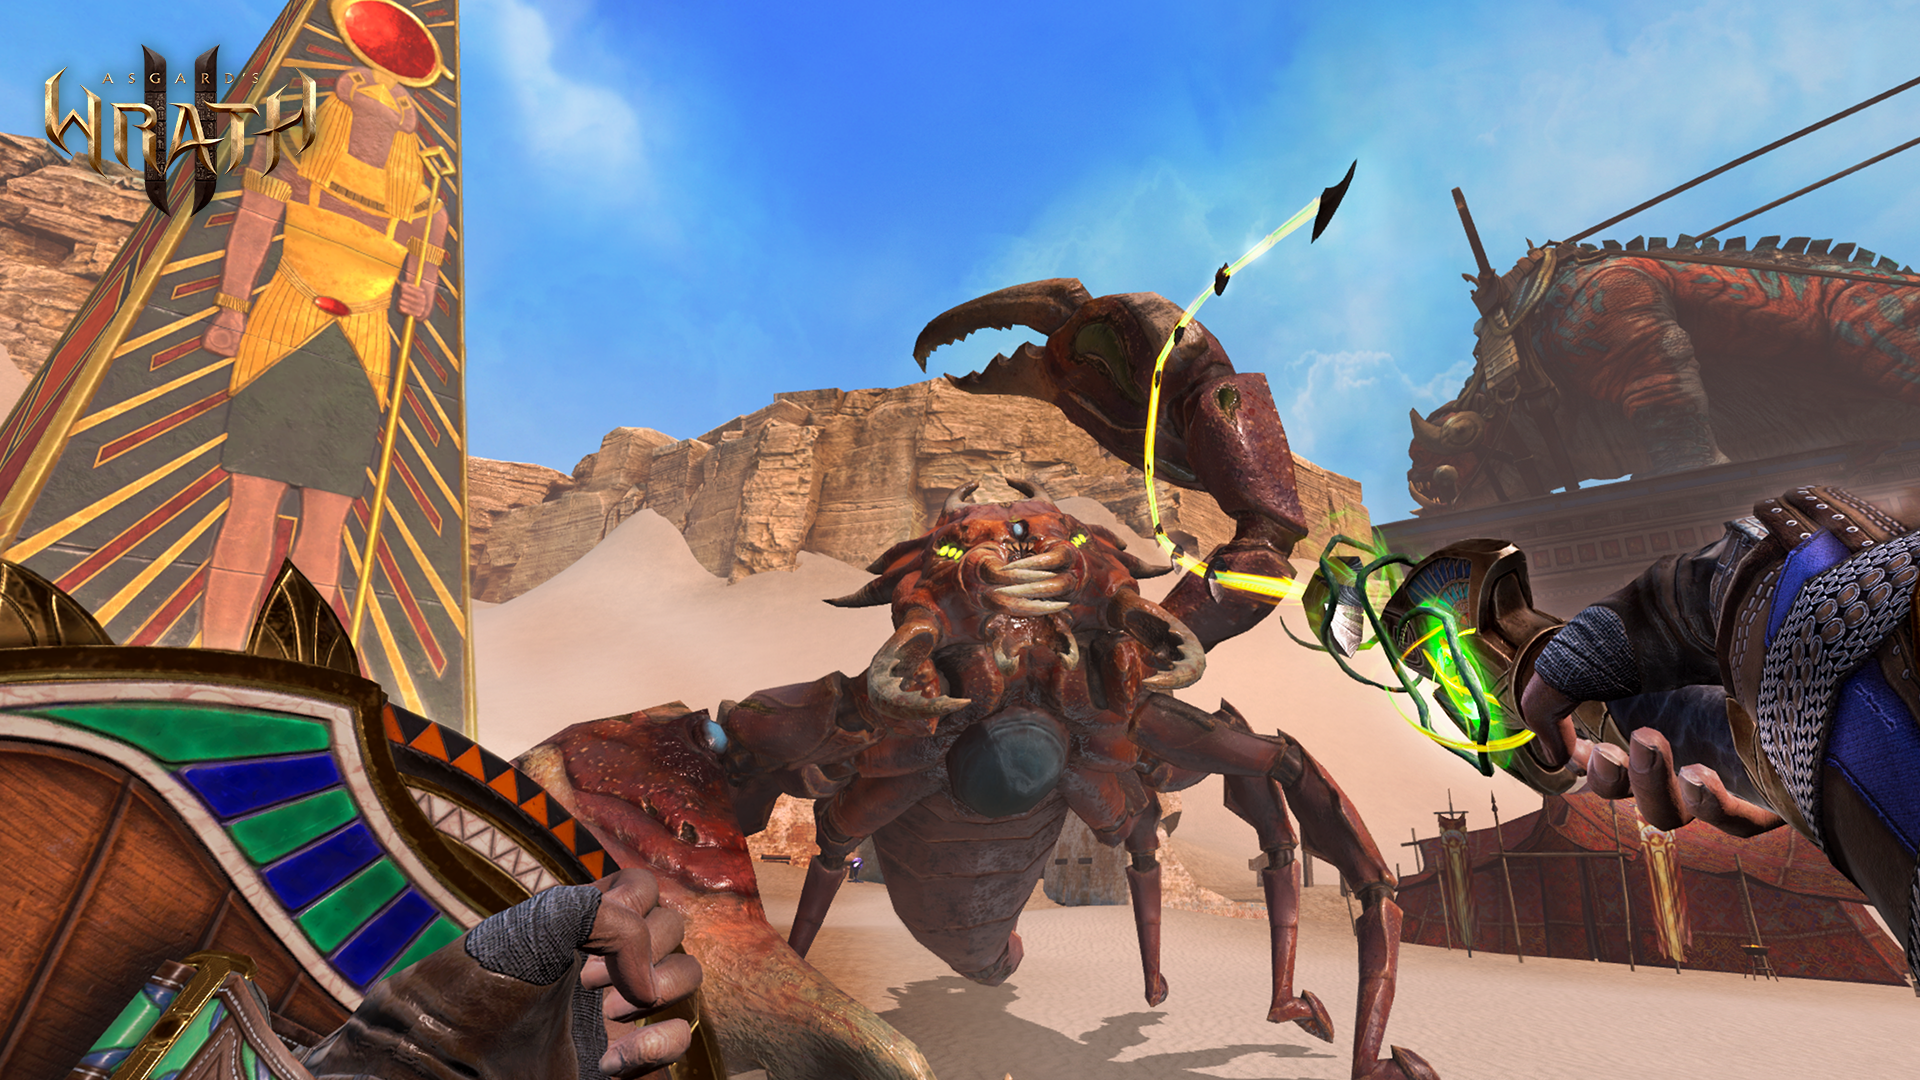 A screenshot of Asgard's Wrath 2 from a first-person perspective. The player character is shown holding a shield in one hand and lashing a whip with the other. In front of the player is a large, crab-like monster. To the left is a pillar with art depicting an ancient Egyptian figure.